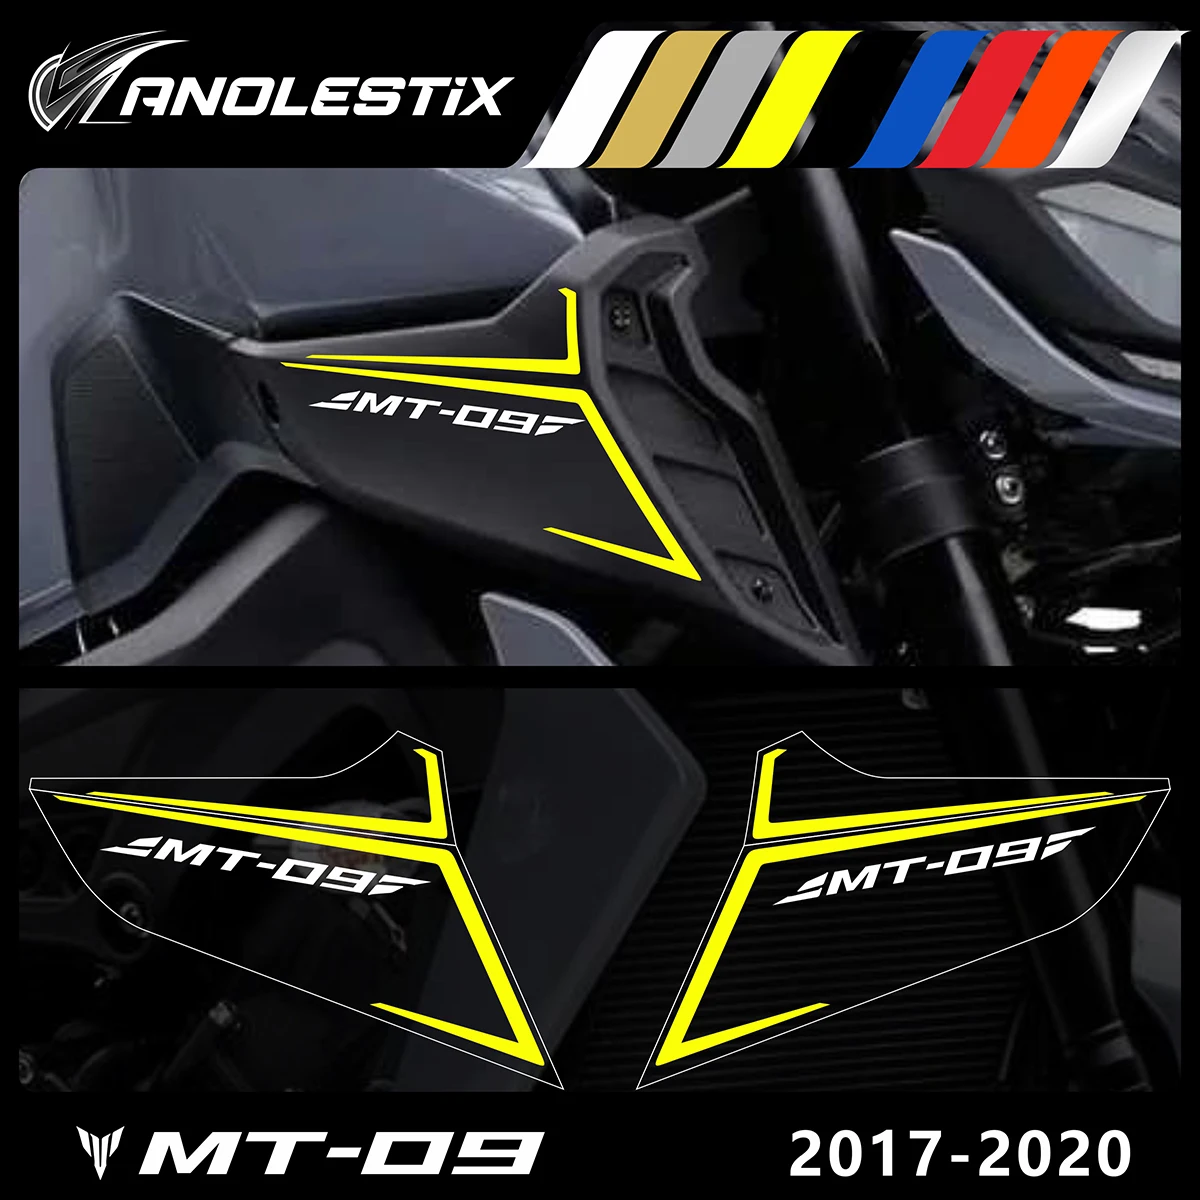 AnoleStix Reflective Motorcycle Stickers Air Intake Side Cover Decals Set For YAMAHA MT09 MT-09 SP 2017 2018 2019 2020